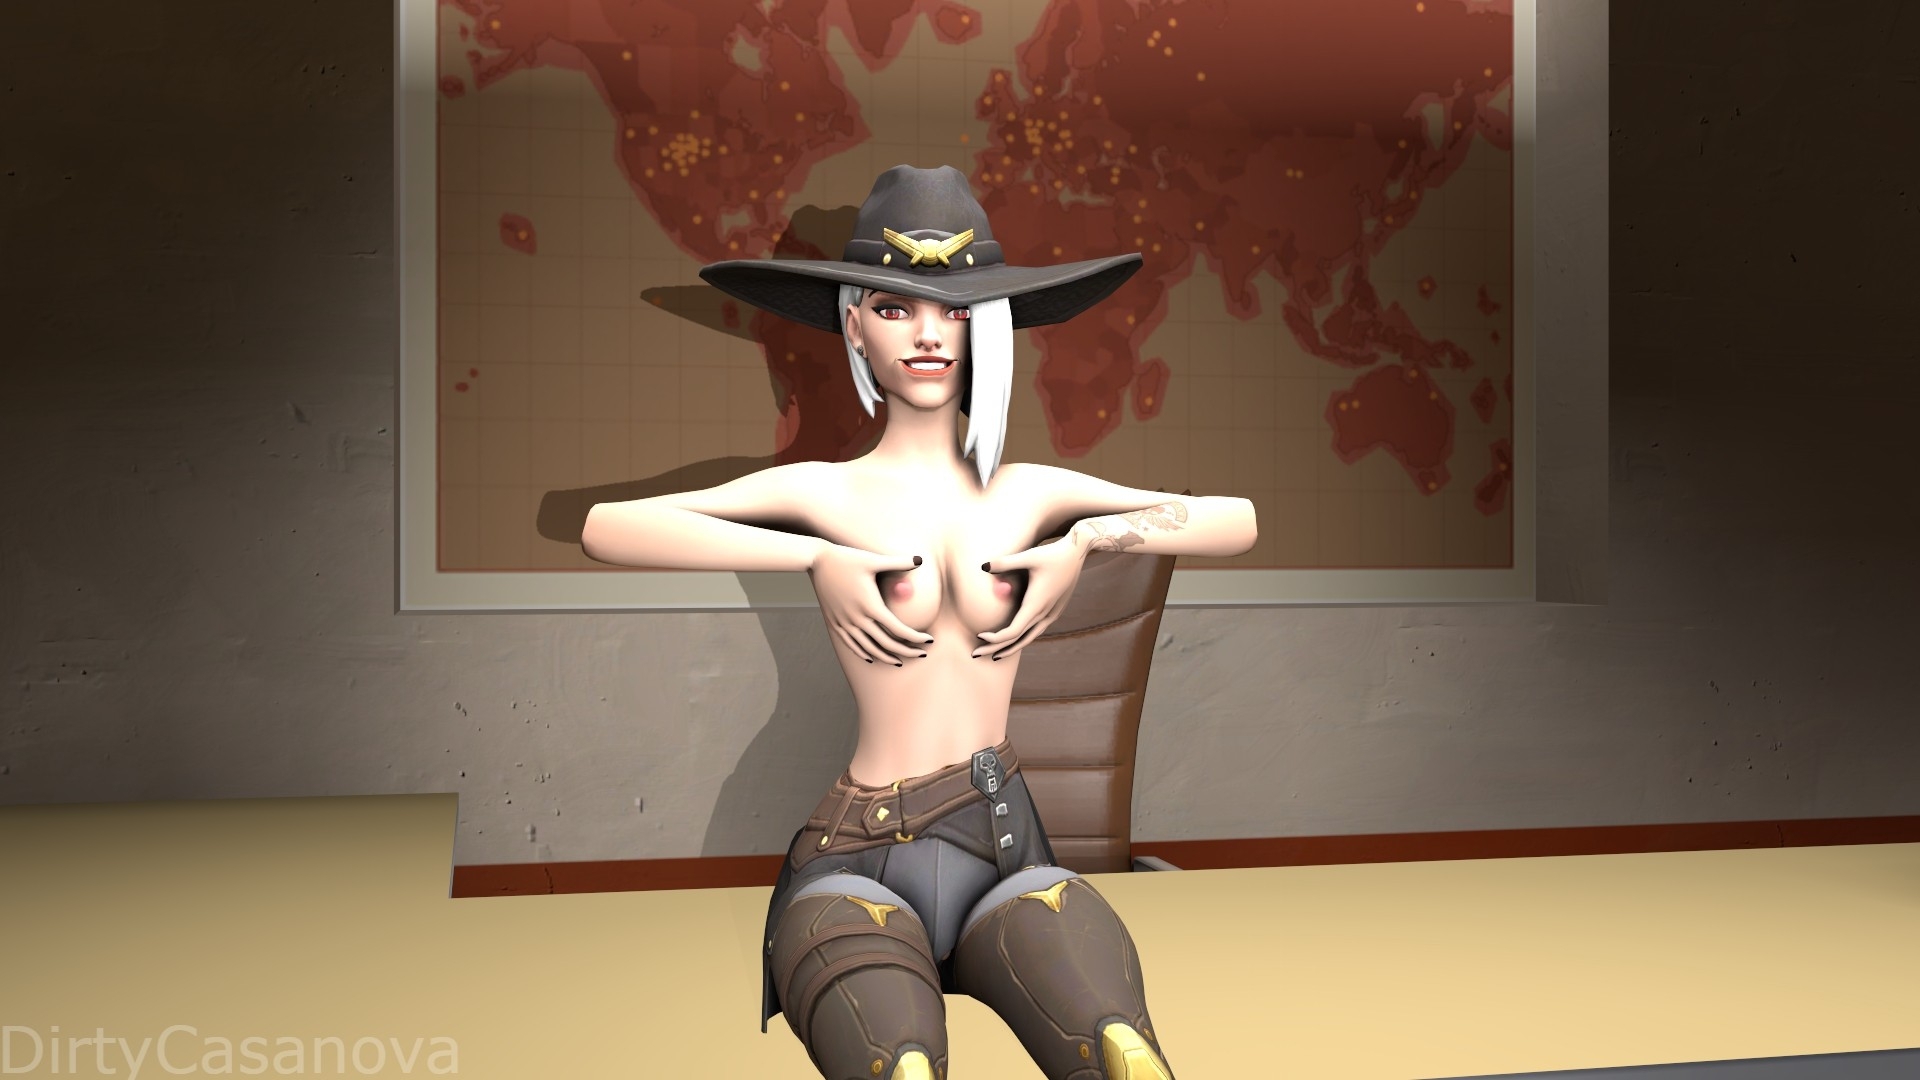 Ashe shows off what shes got Ashe Overwatch Grab Boobs Female